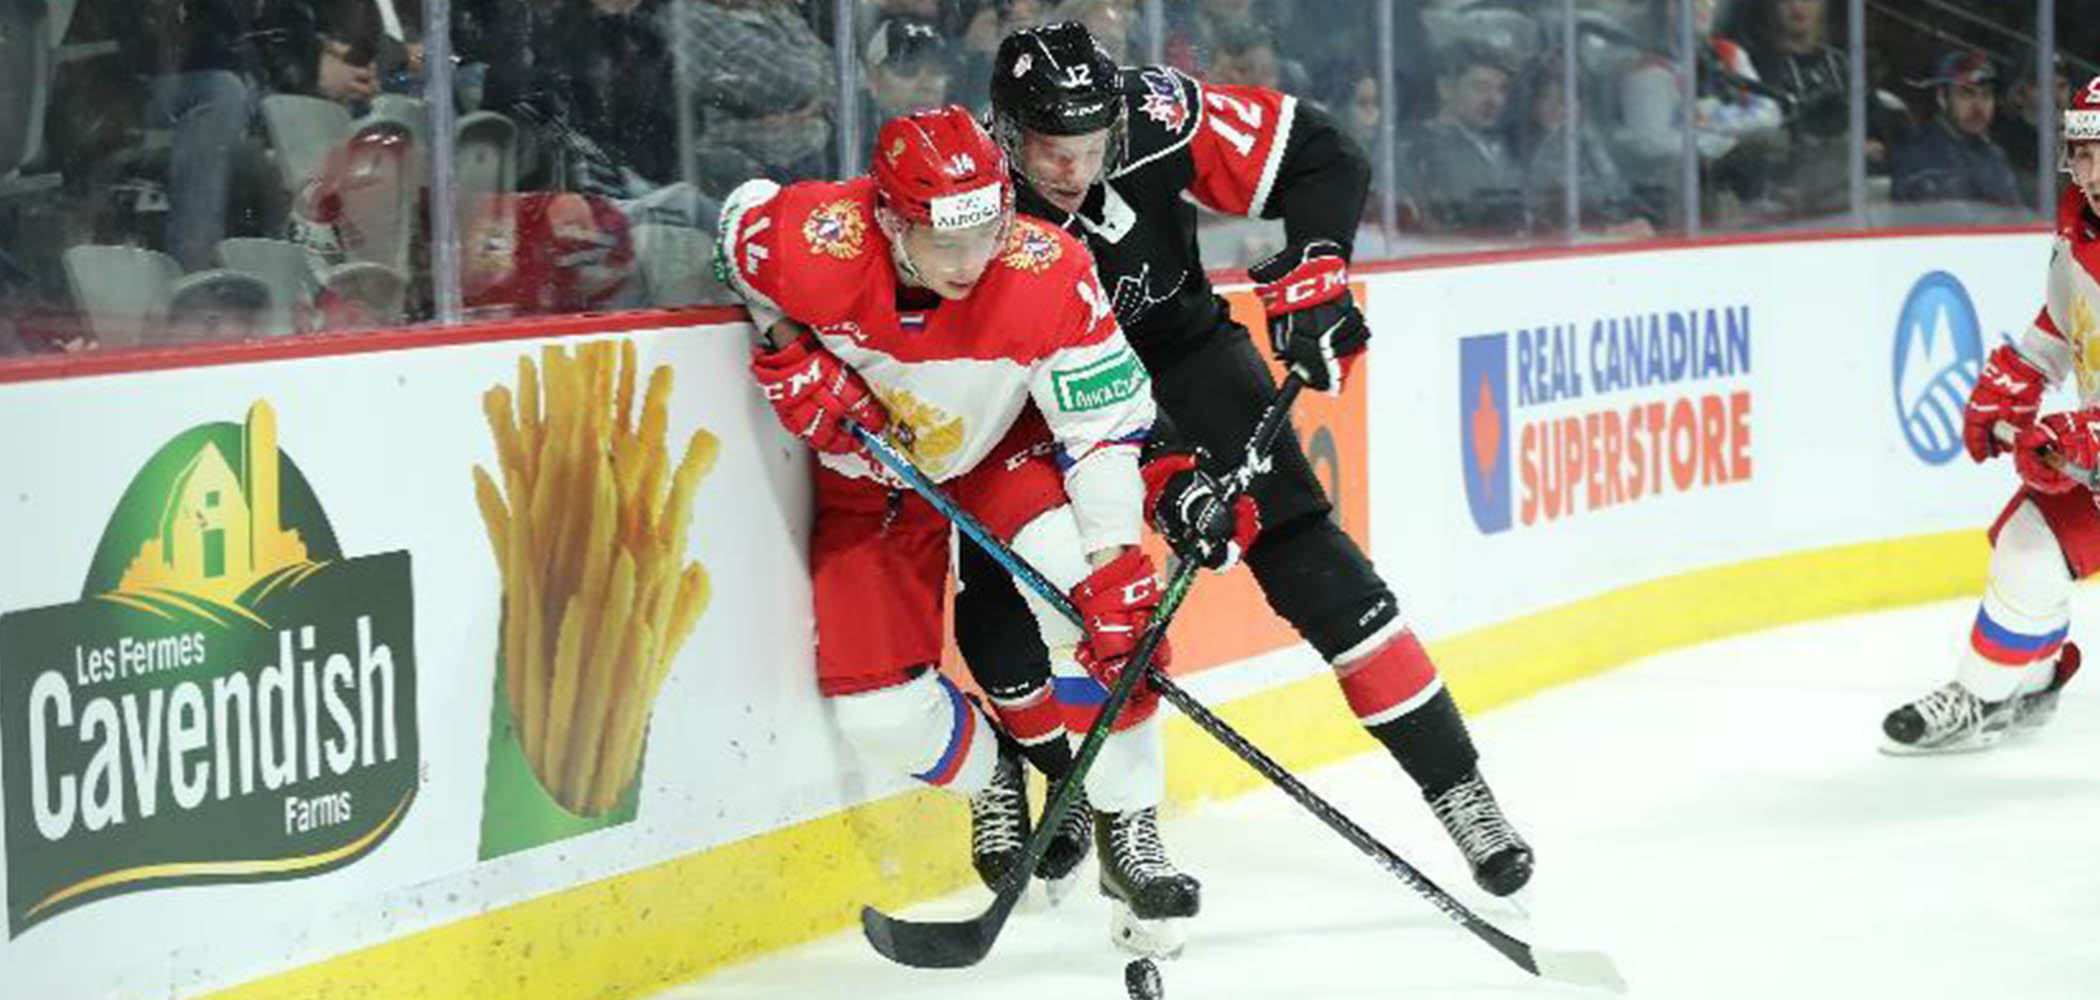 Snapshot of a hockey match in the Canada Russia Series sponsored by Cavendish Farms